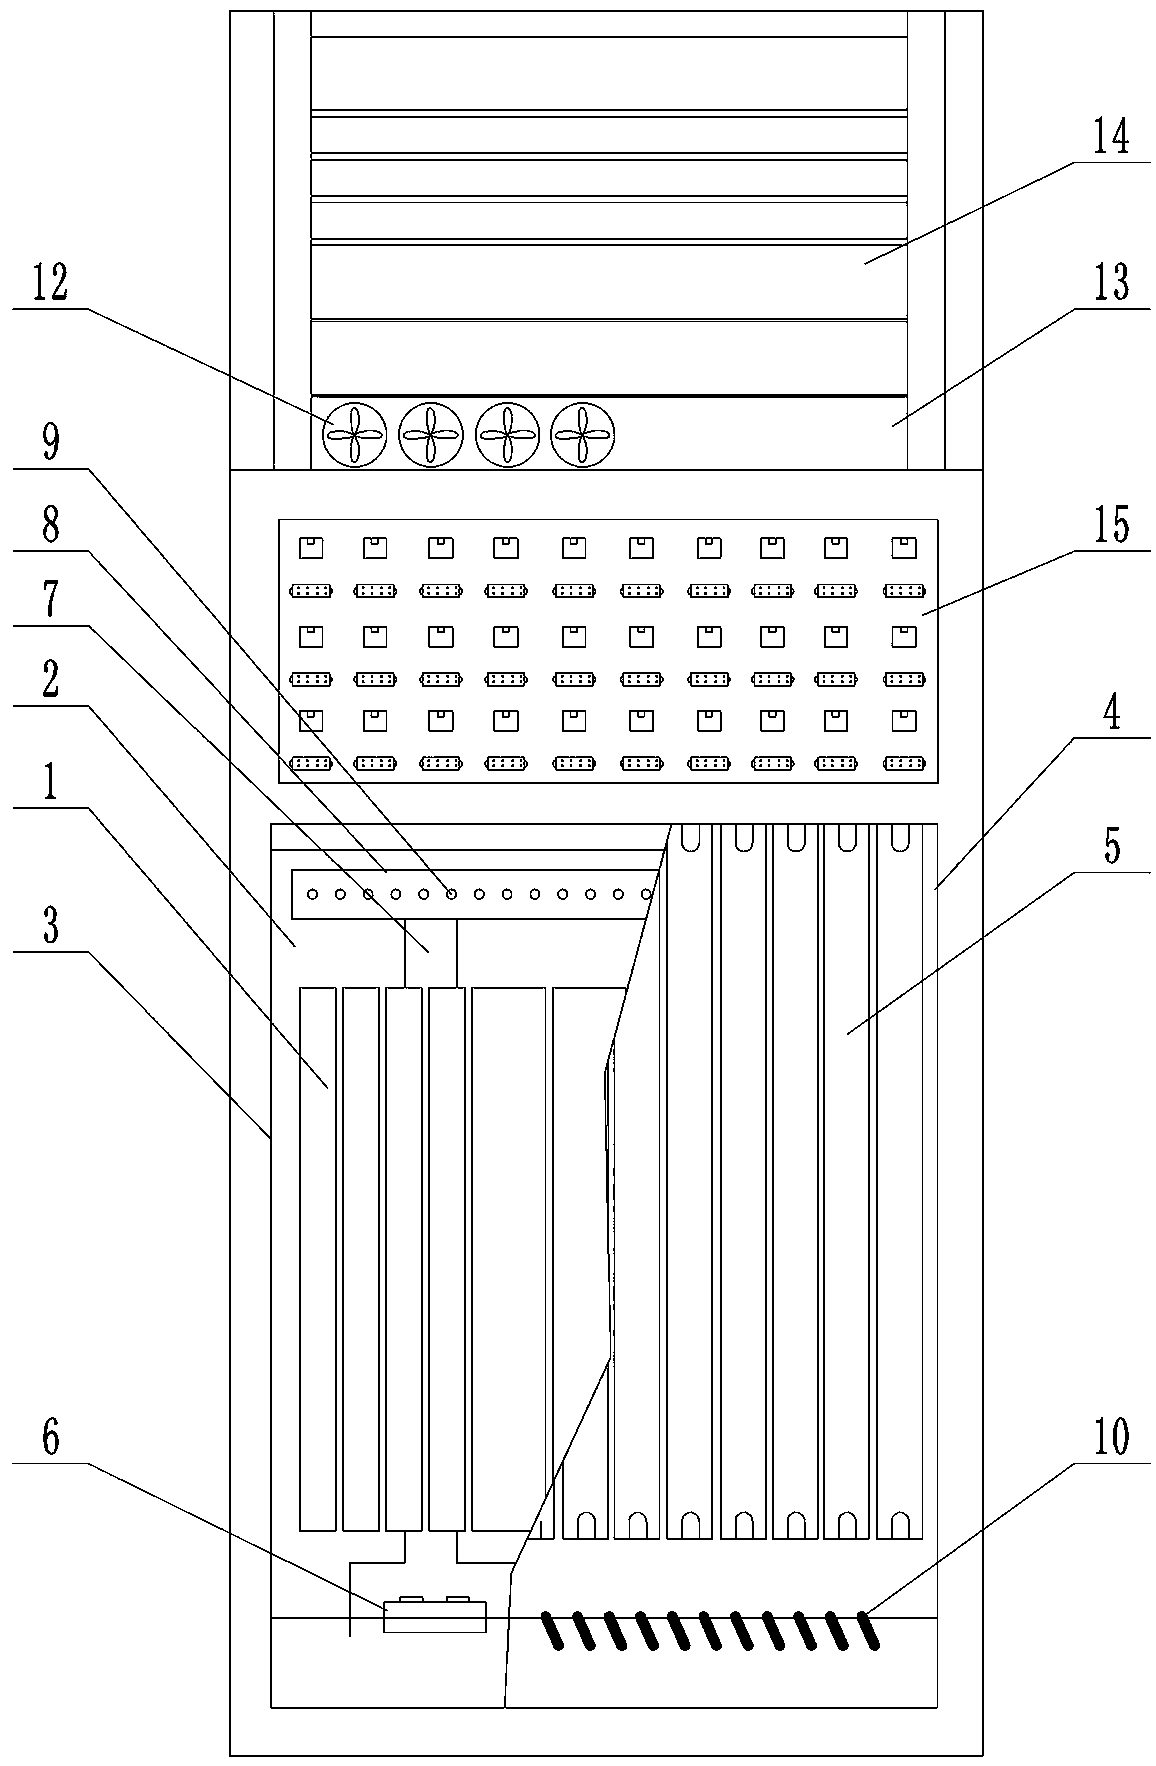 Cabinet and server cooling device